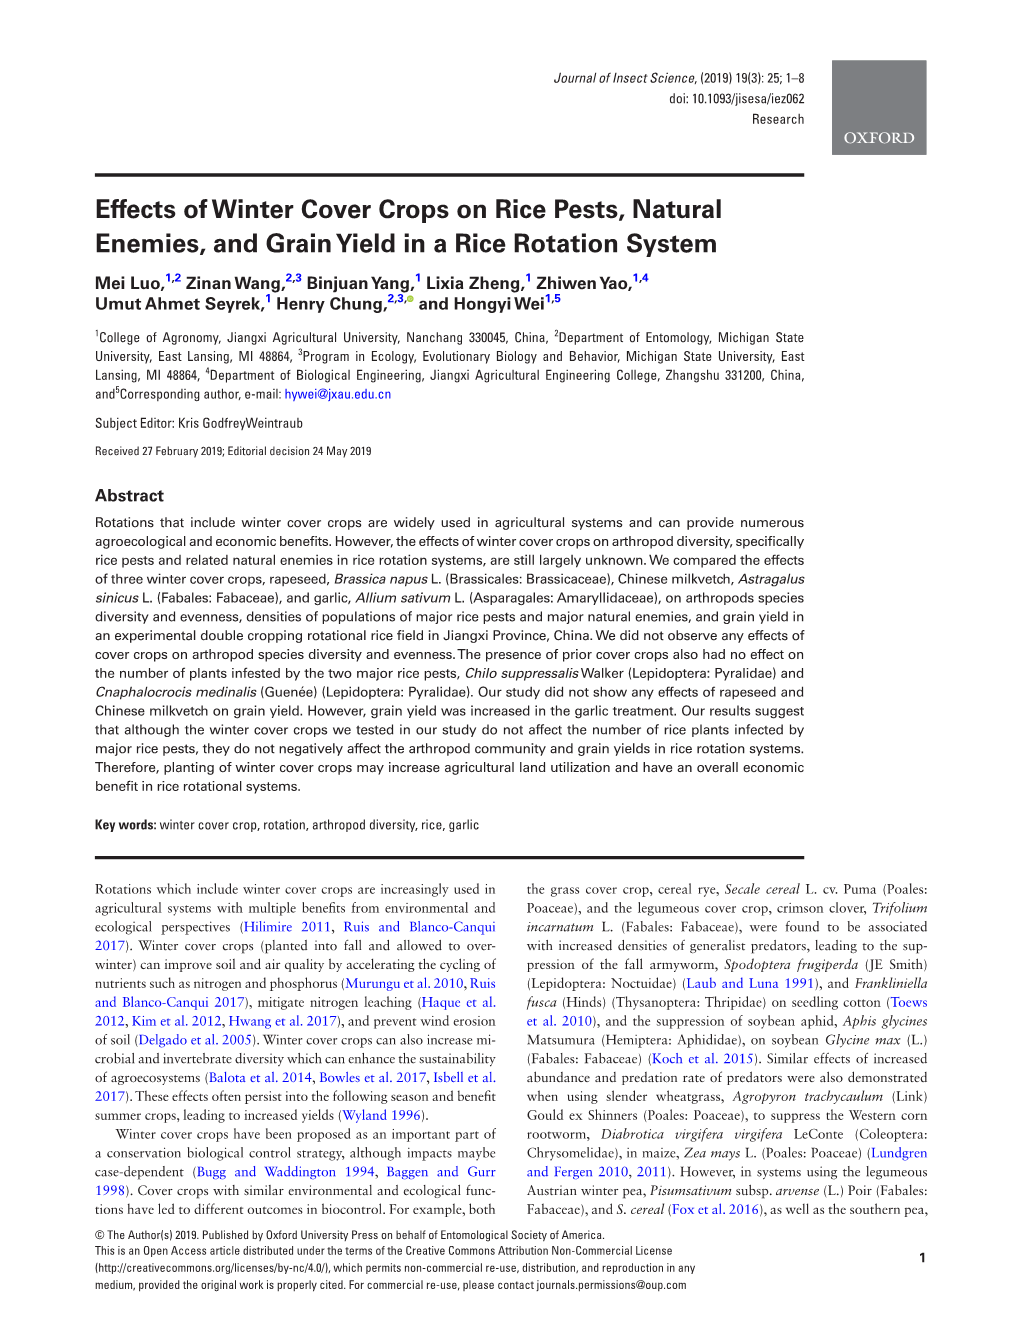 Effects of Winter Cover Crops on Rice Pests, Natural Enemies, and Grain Yield in a Rice Rotation System